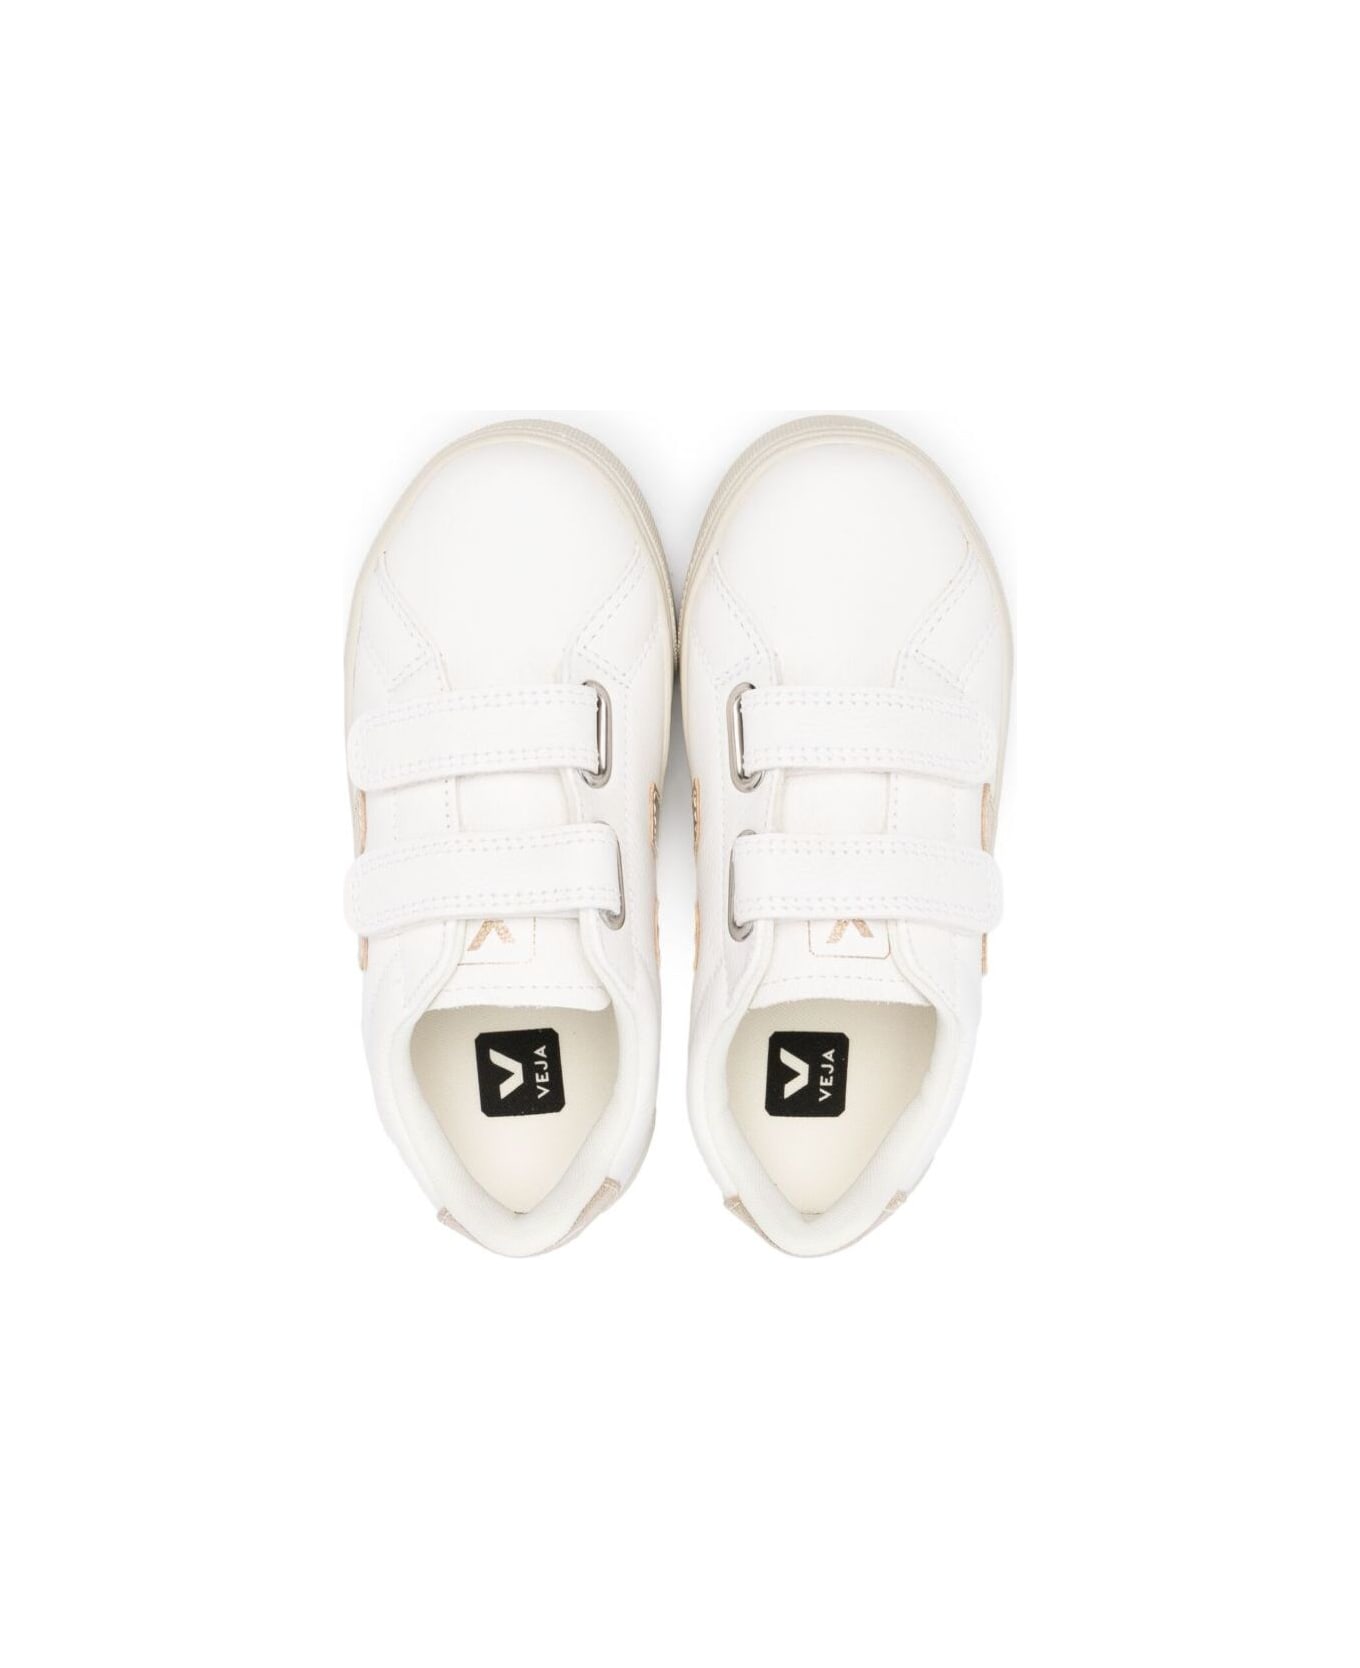 Veja White Sneaker With Platinum Logo And Heel Tab In Leather Girl - White シューズ